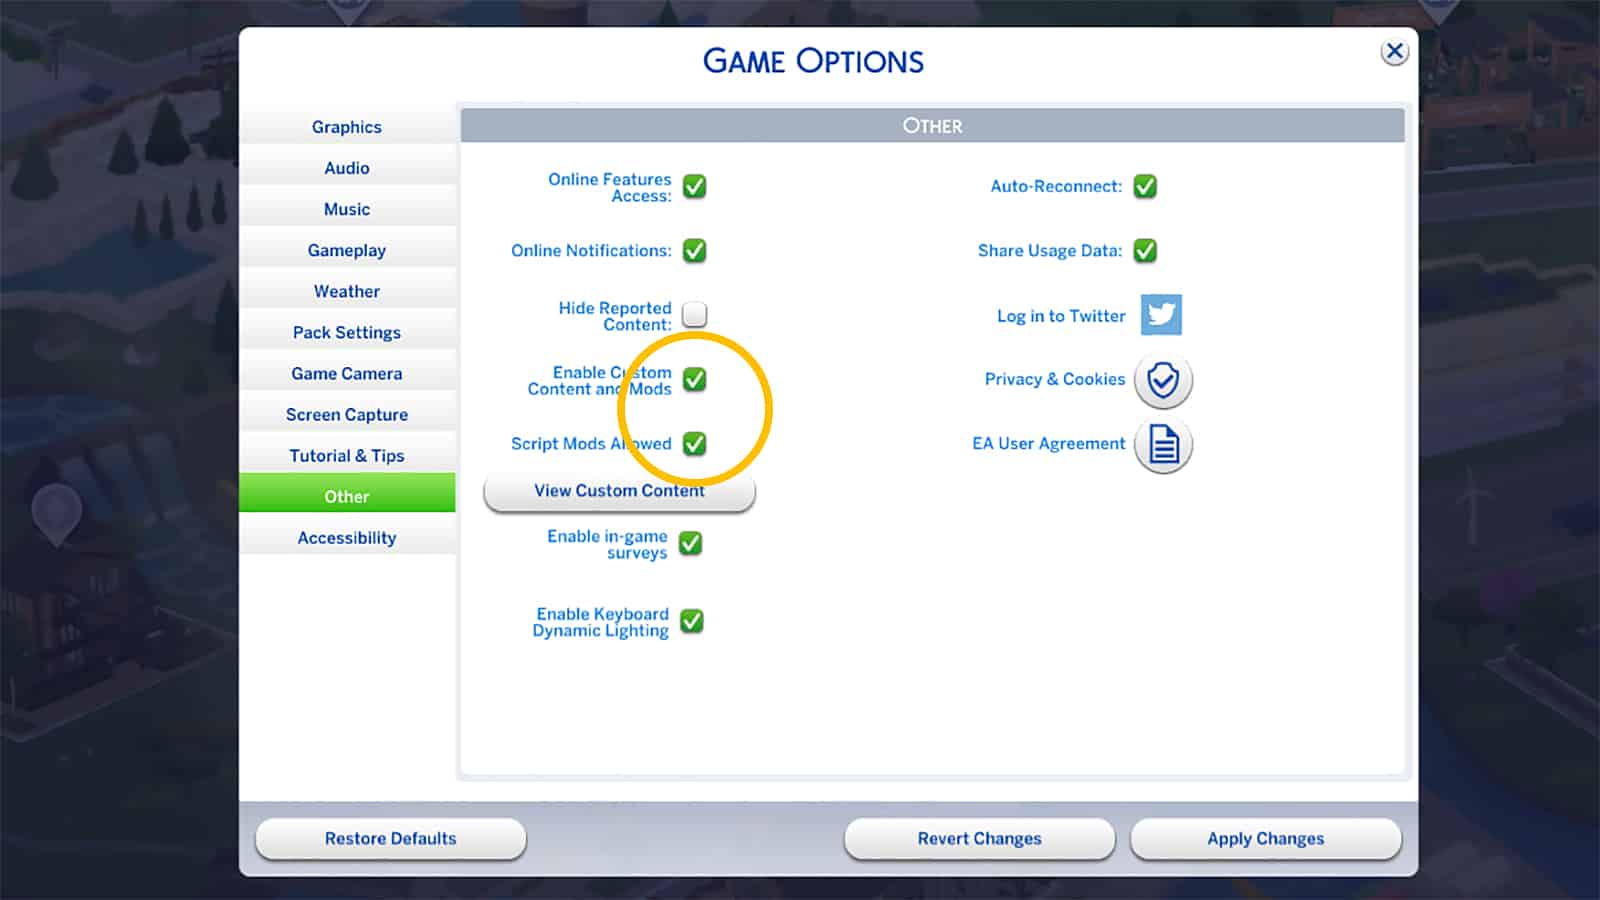 Game Options window in The Sims